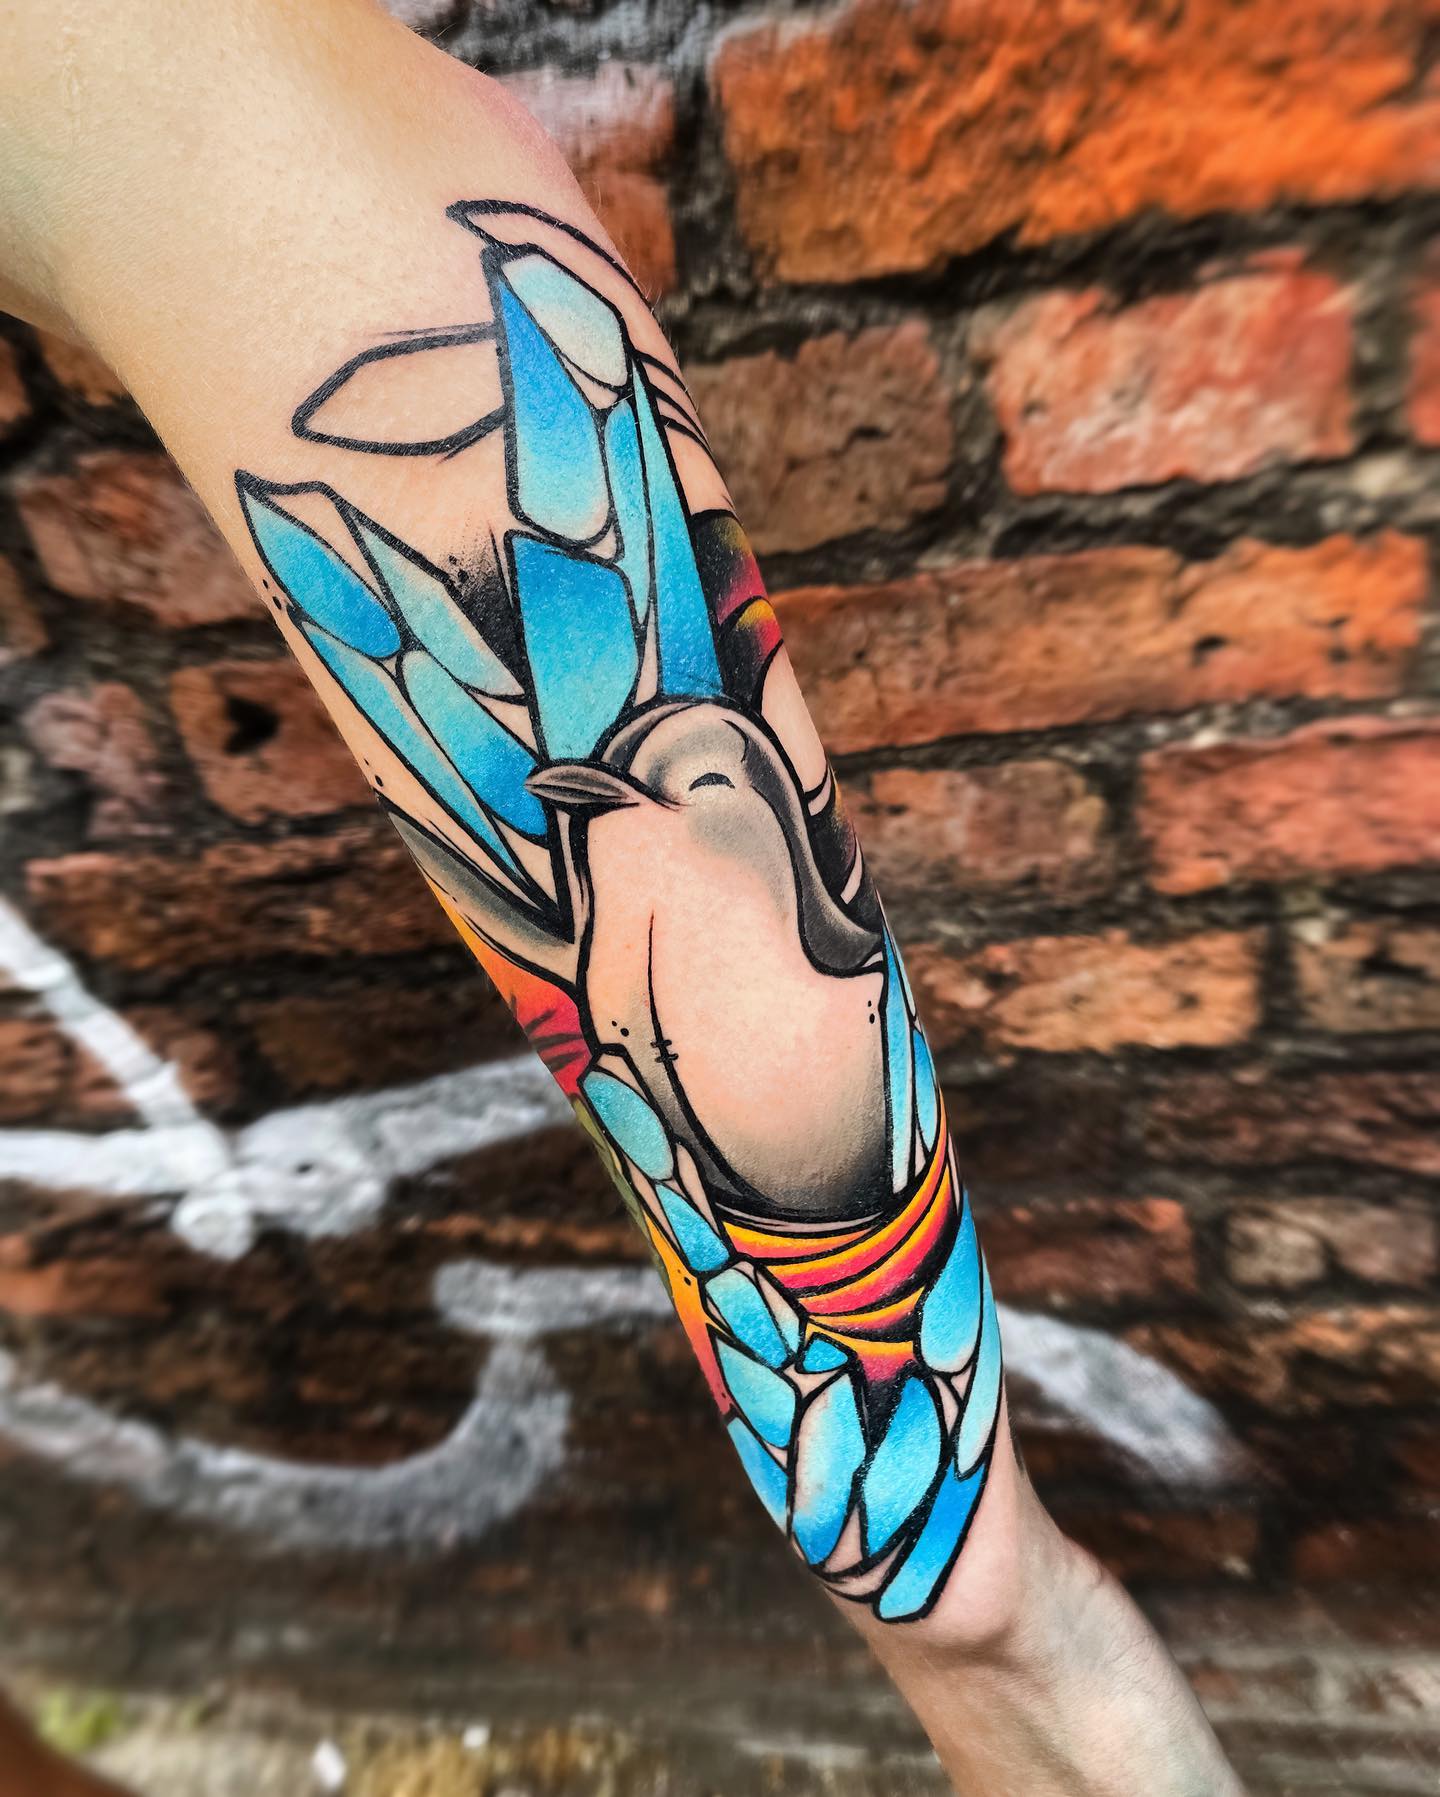 The penguin breaks the ice with its warming heart in this tattoo. Bright and colorful inks allow this tattoo to shine out in the crowd.